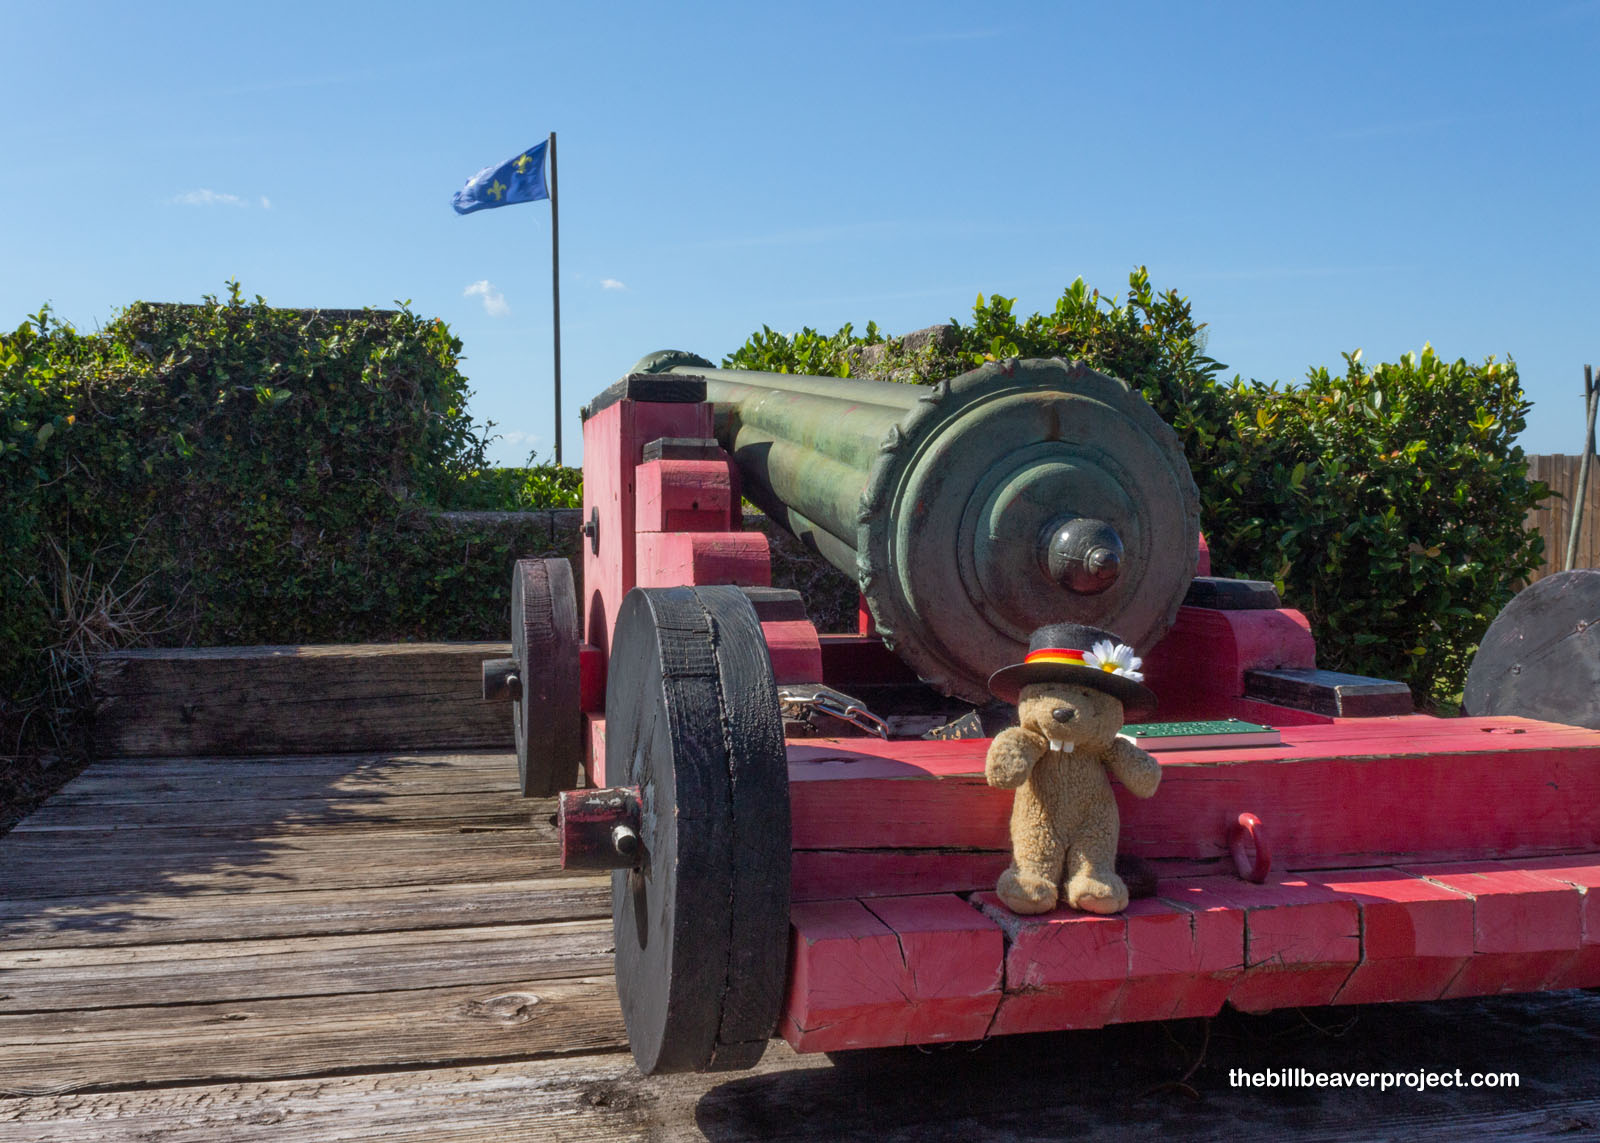 A cannon and the old French flag!